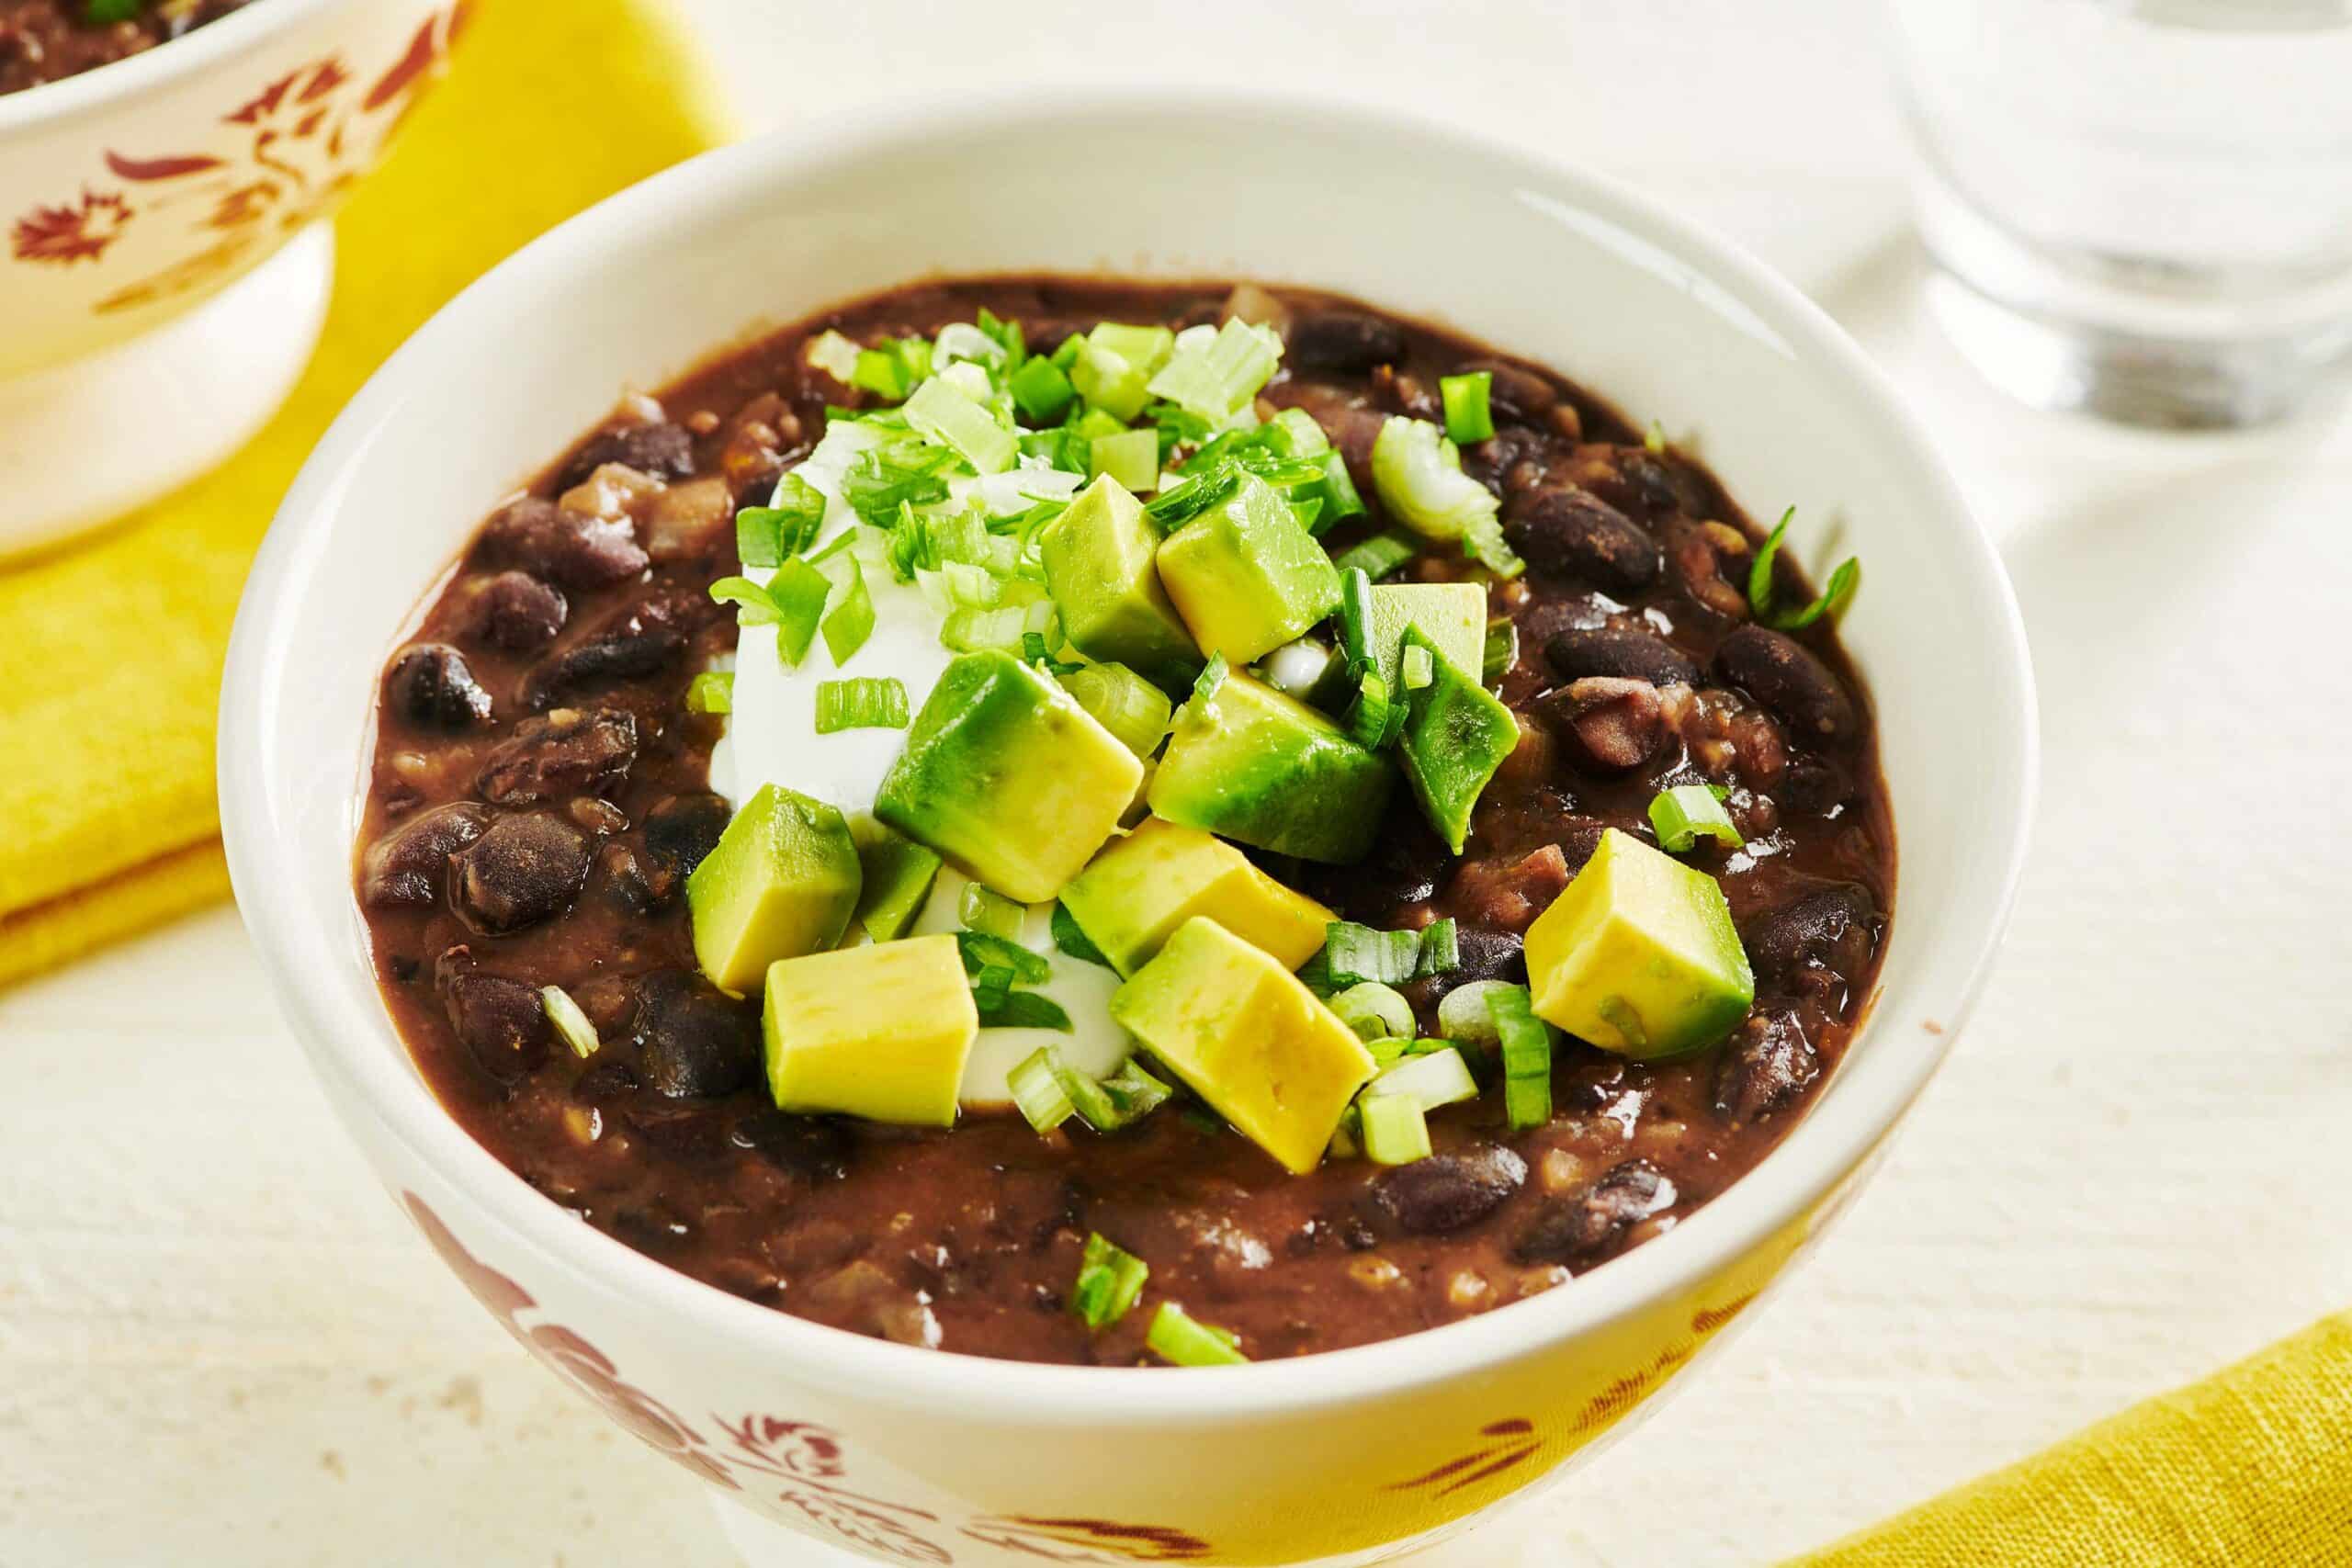 Bowl of Vegetarian Black Bean Soup topped with avocado.